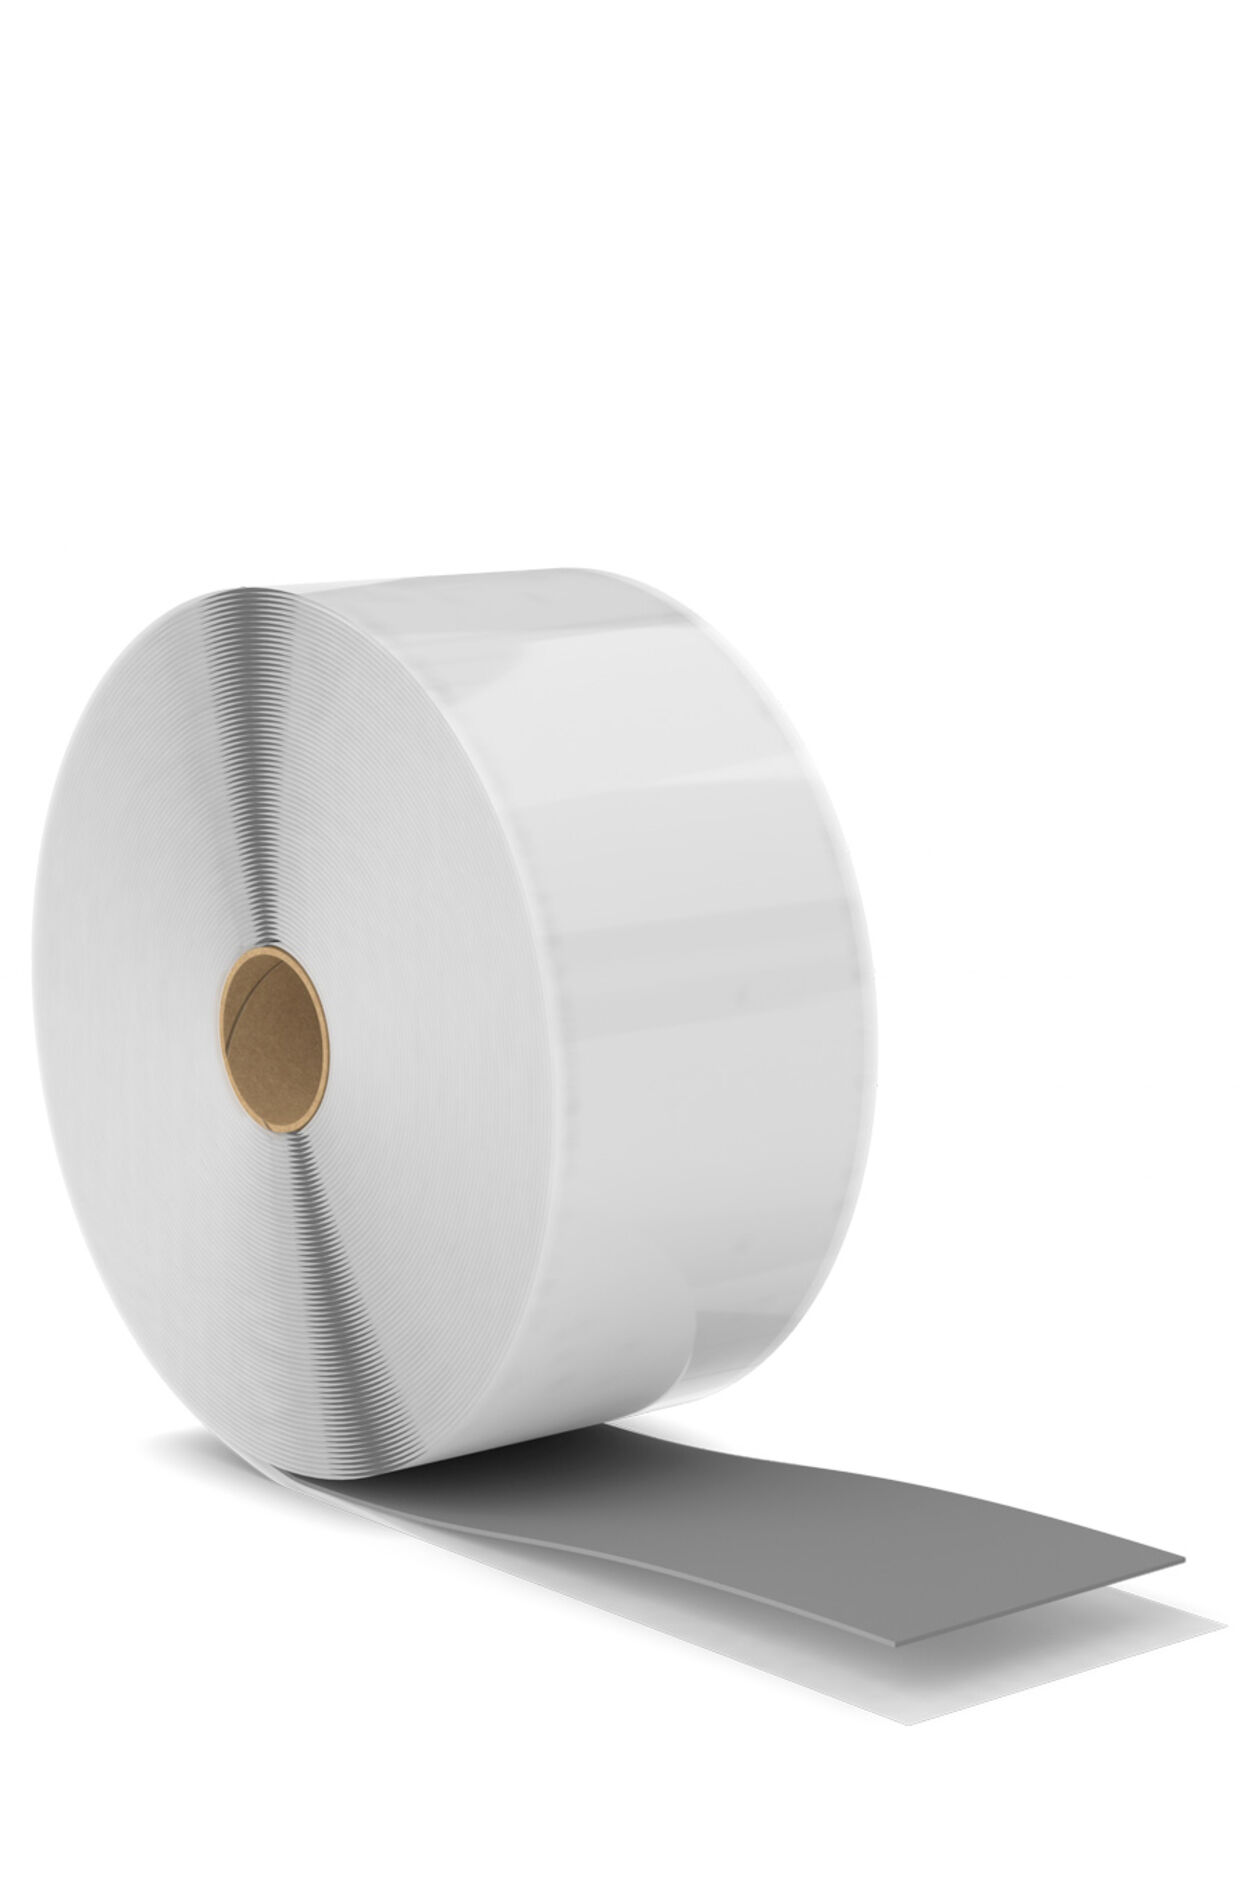 Butyl tape for safe, universal sealing